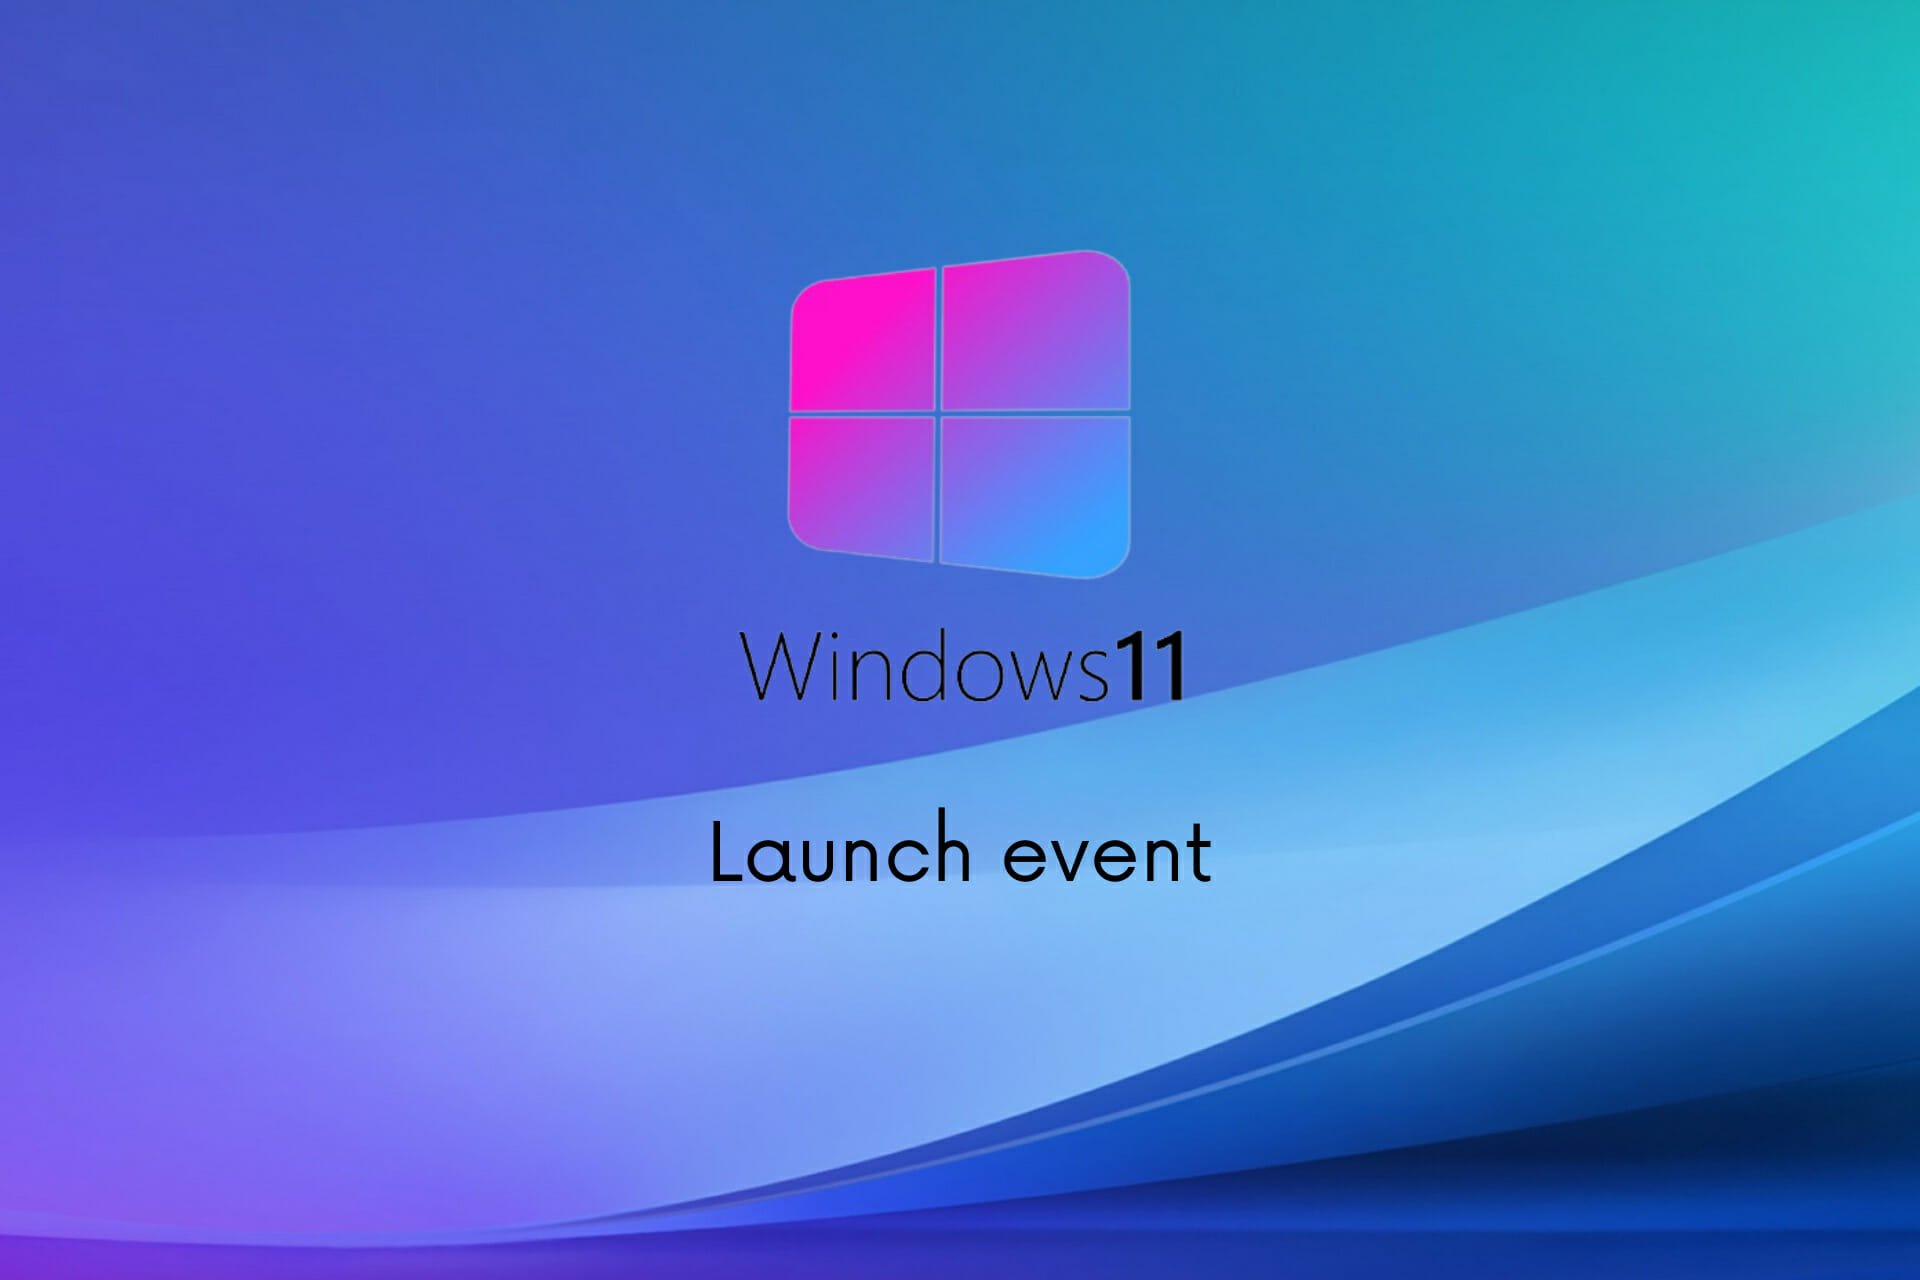 Catch Microsoft's latest updates in our Windows 11 live event coverage